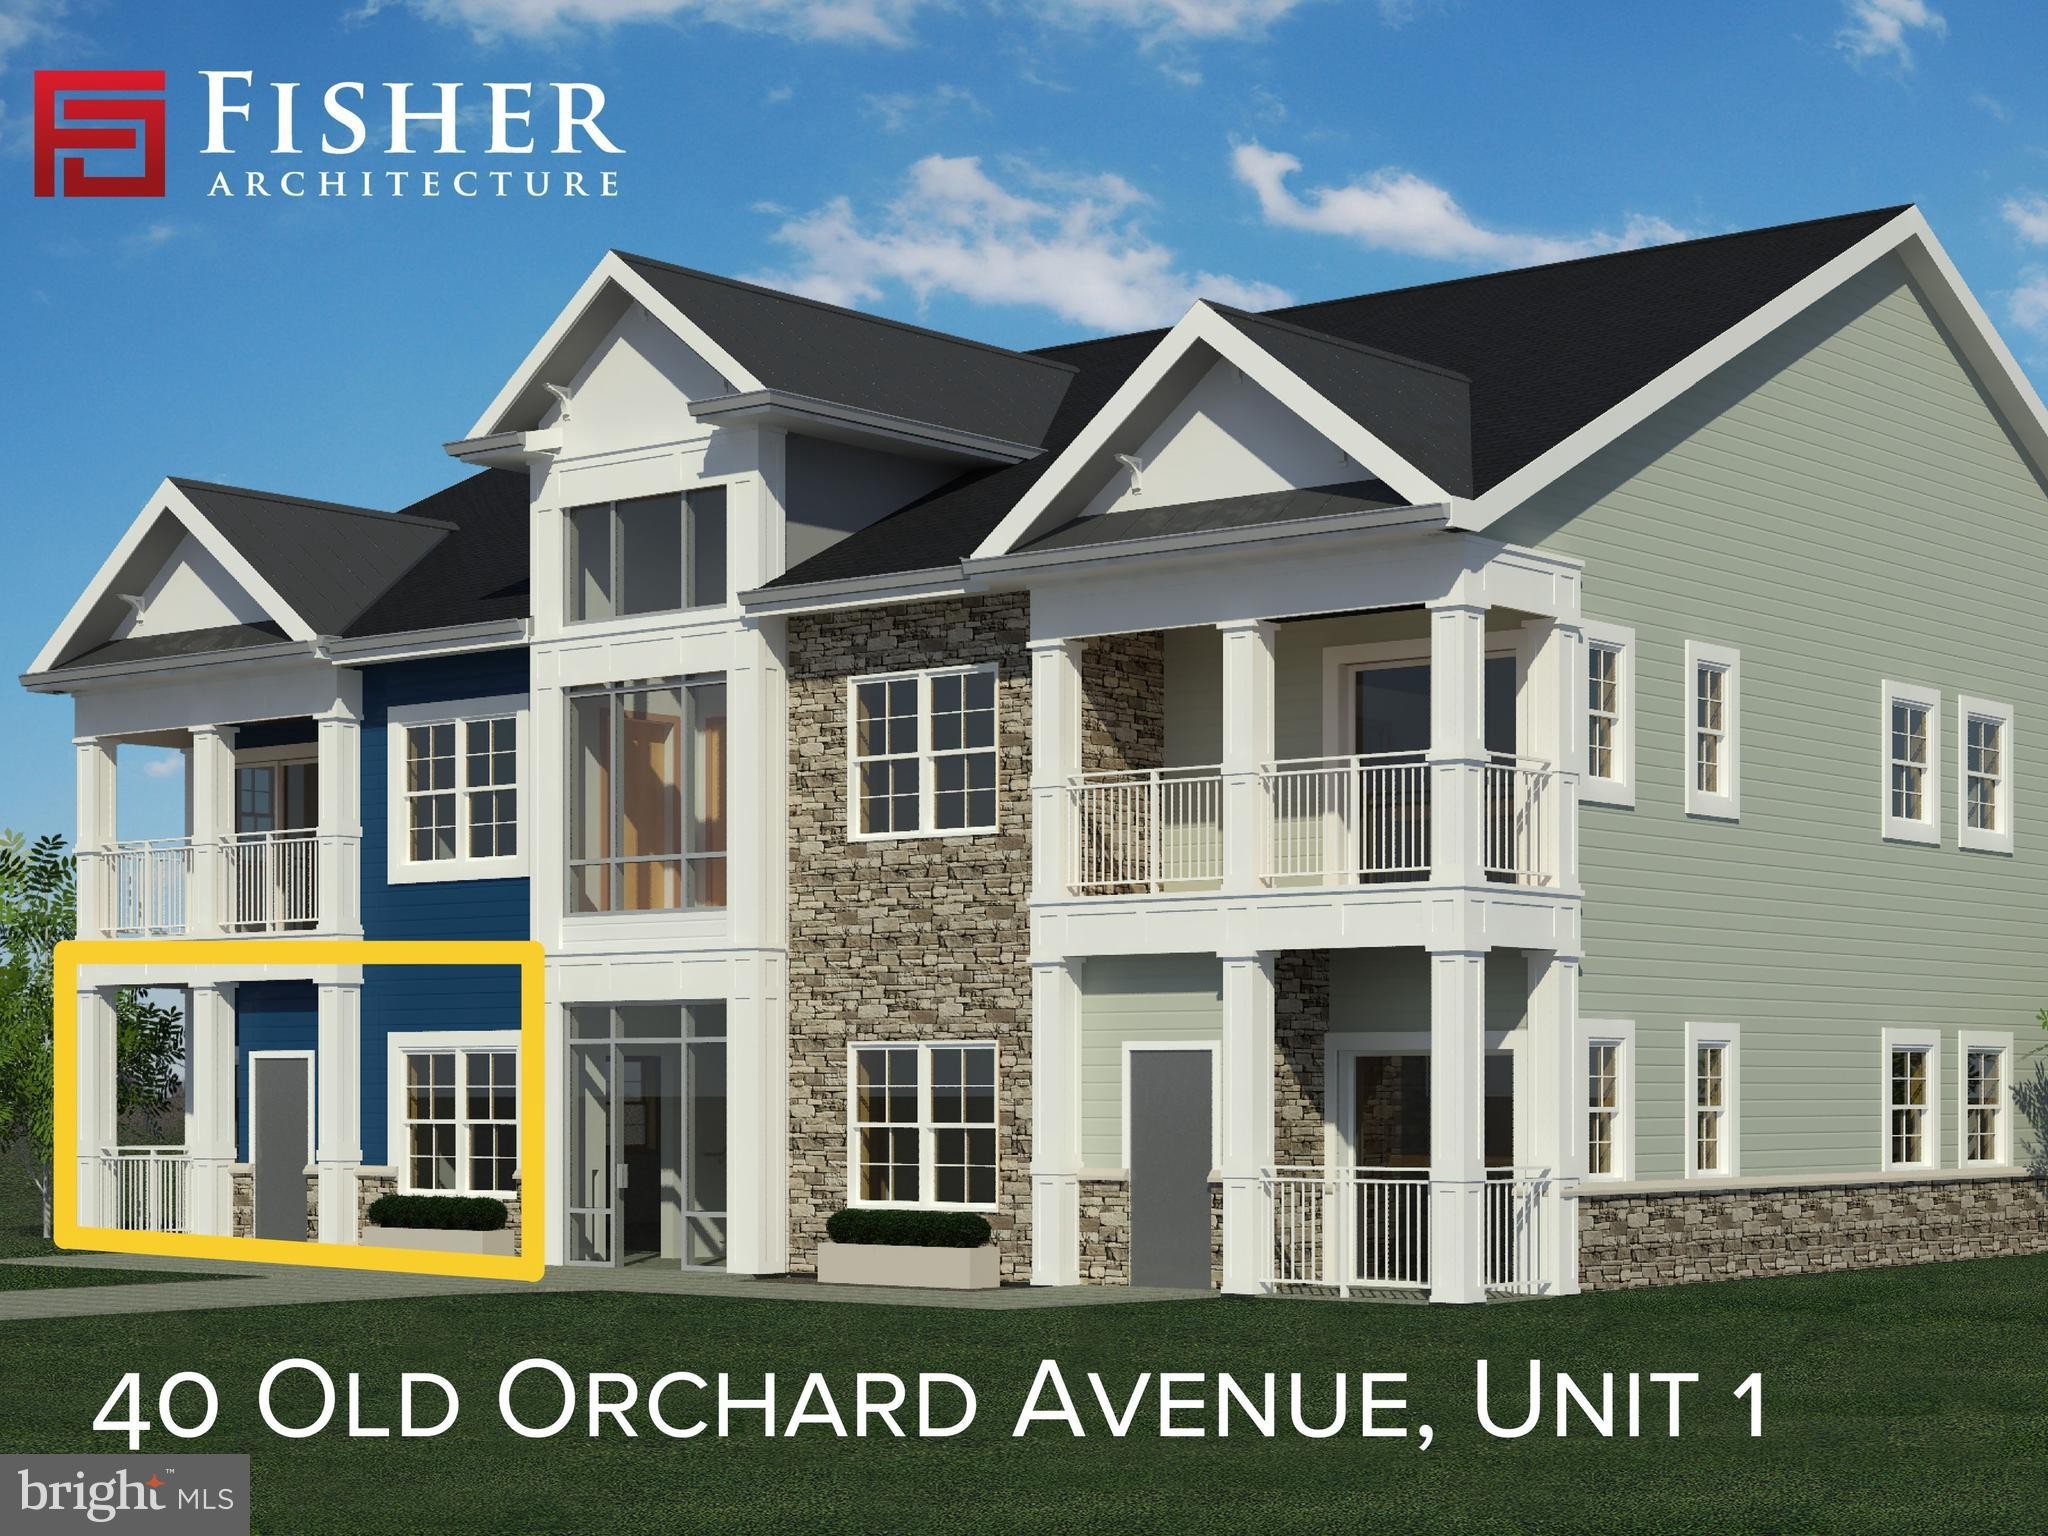 2. 40 Old Orchard Avenue